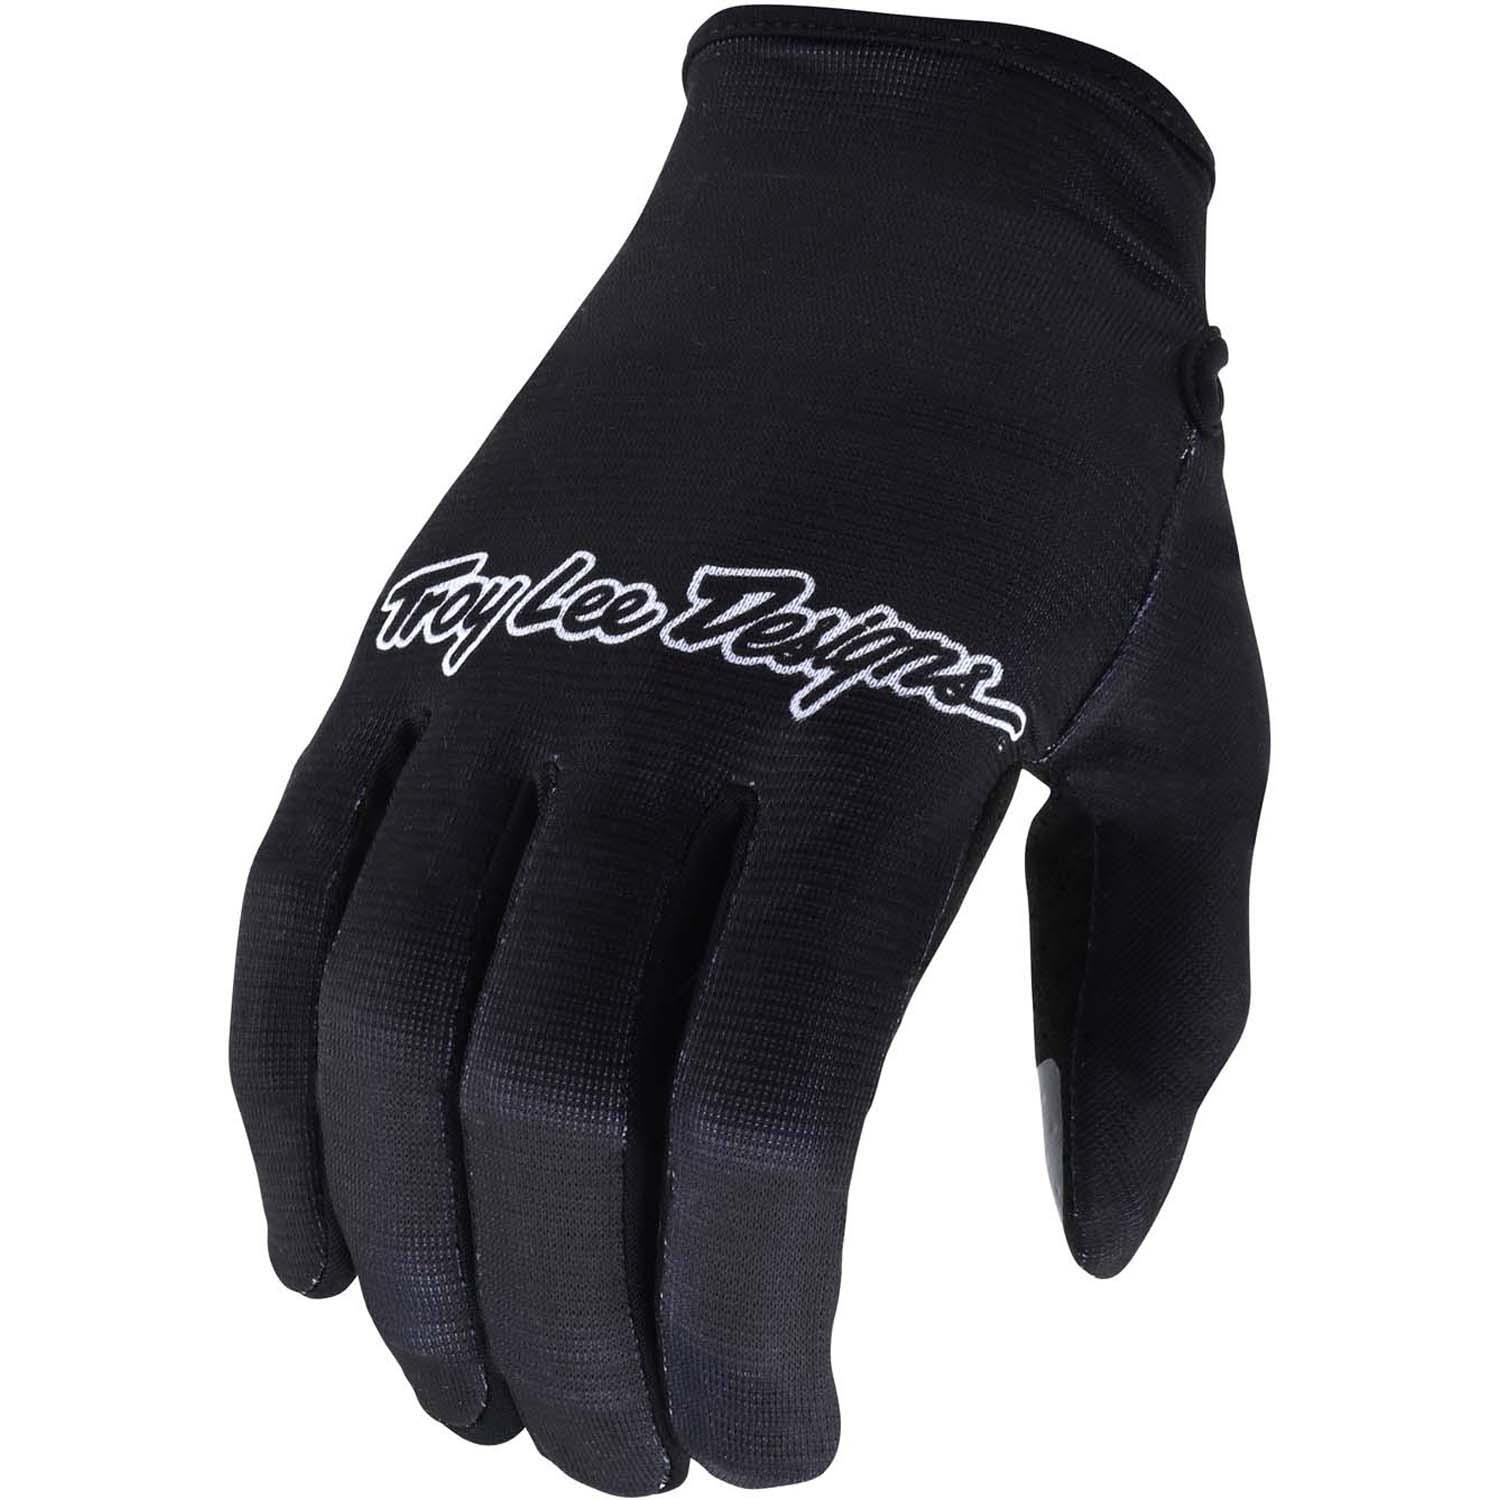 Photos - Cycling Gloves TLD Troy Lee Flowline Race Gloves - Solid Black XX Large SG30208 